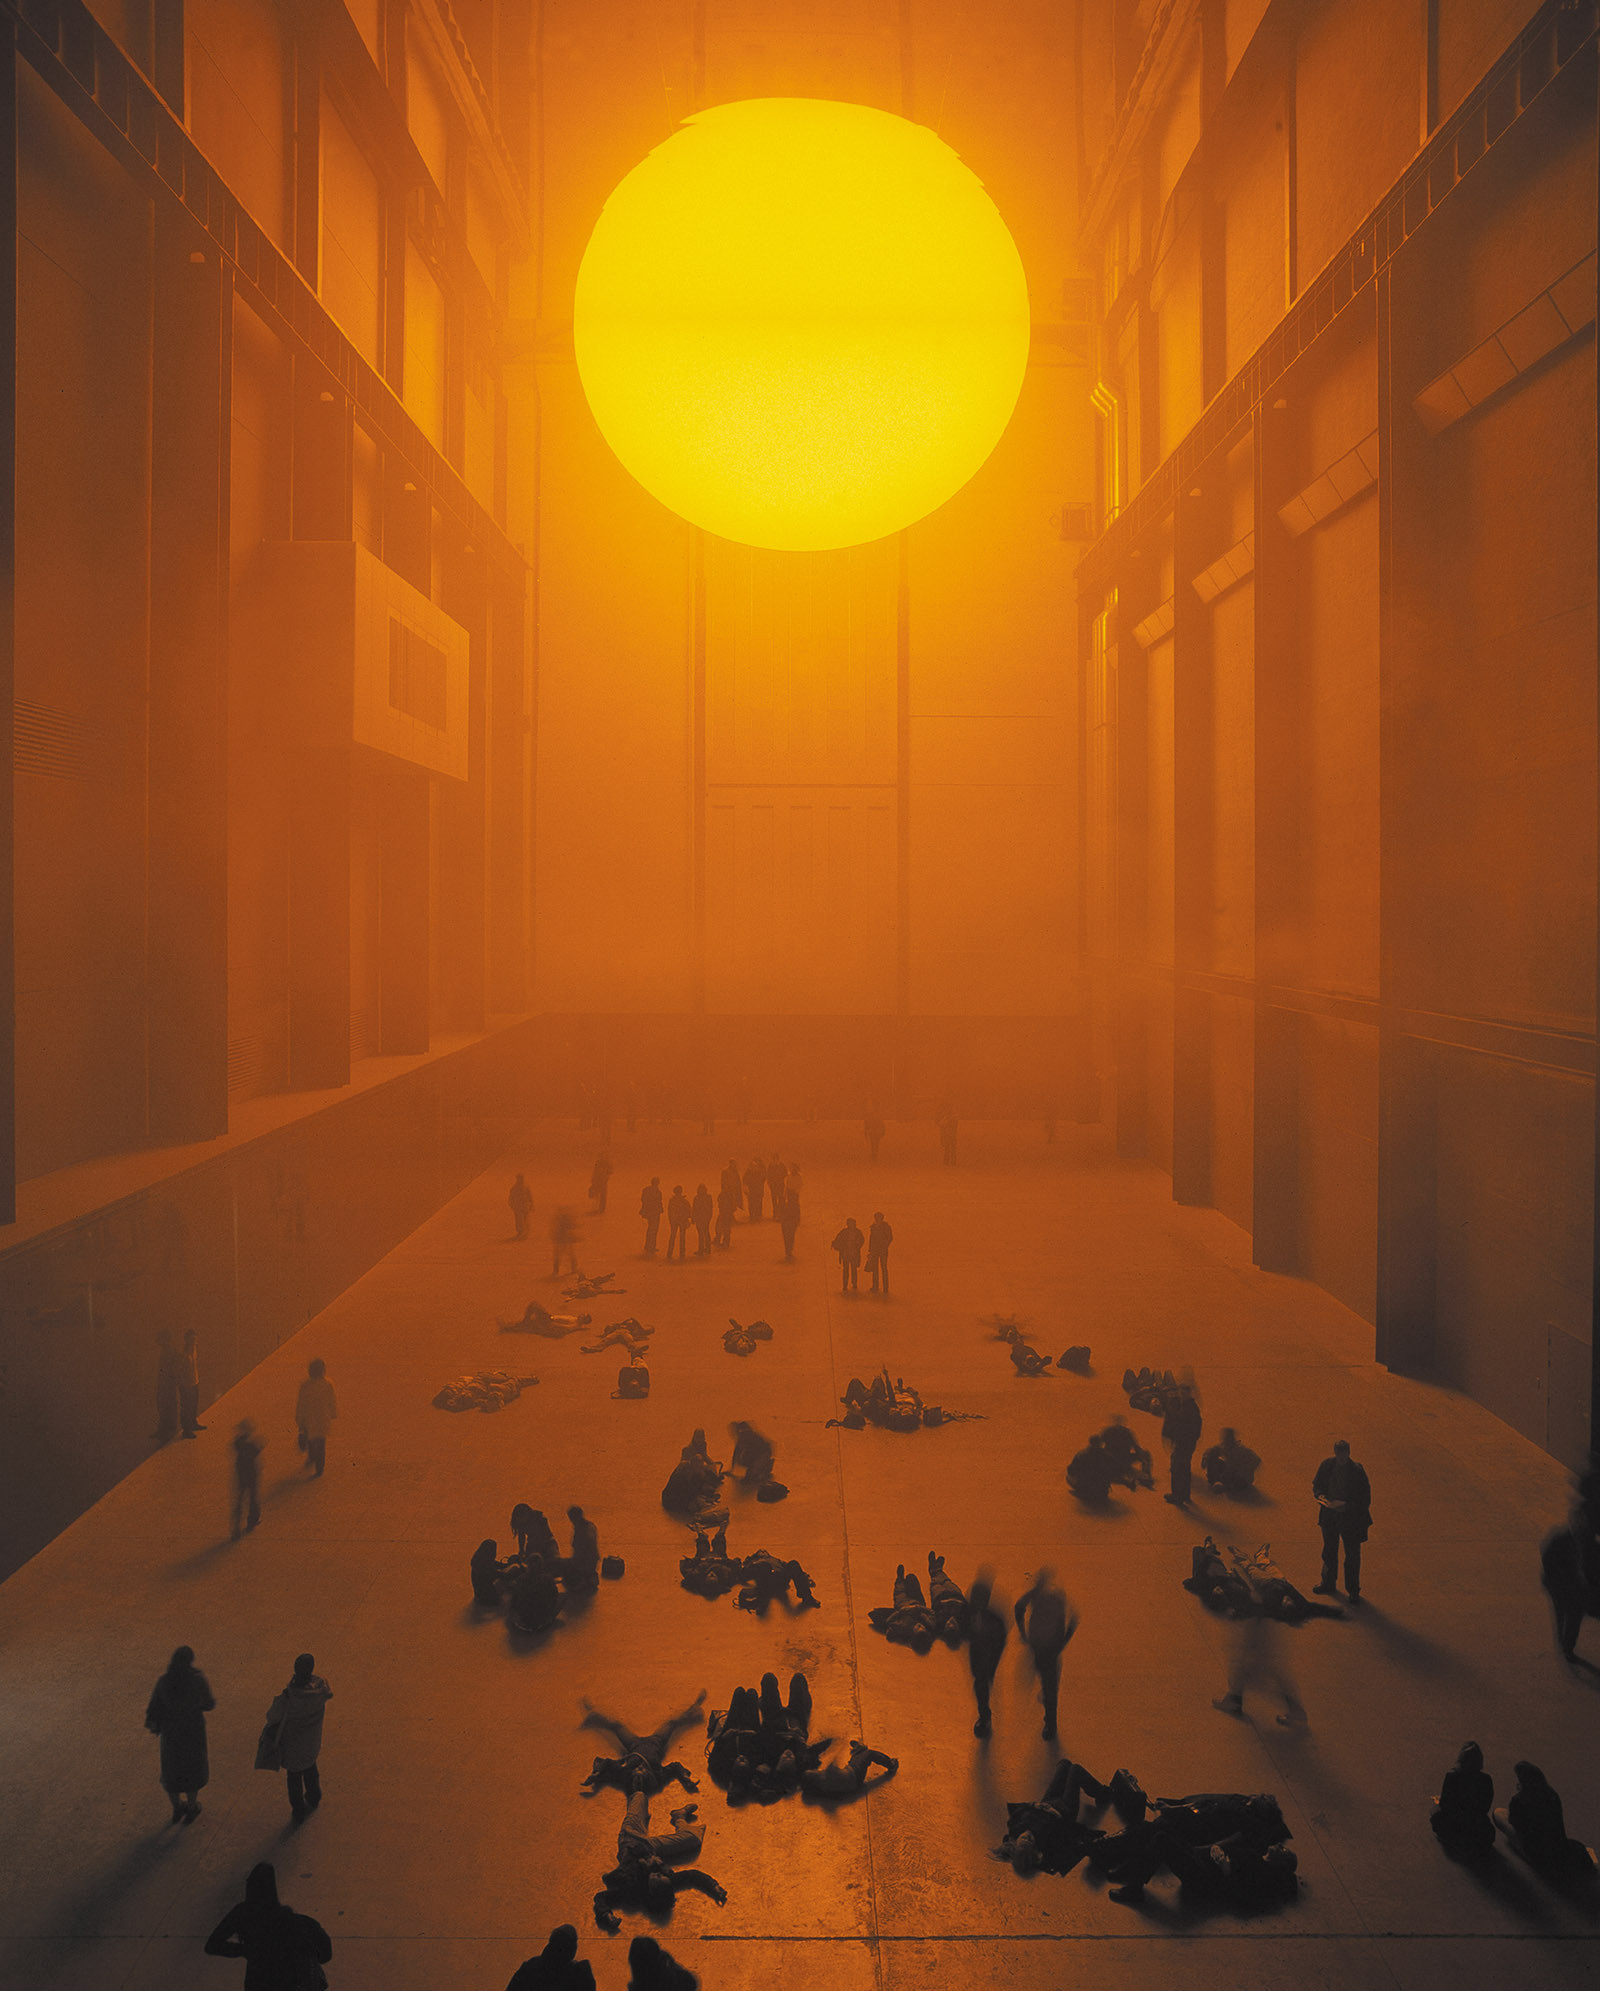 Olafur Eliasson: The weather project, 2003 Photo credit: Tate Photography, Andrew Dunkley & Marcus Leith. I first saw this work in London during its tenure at the Tate Modern. Even now, this artwork moves me and feeds my imagination and inspires me.